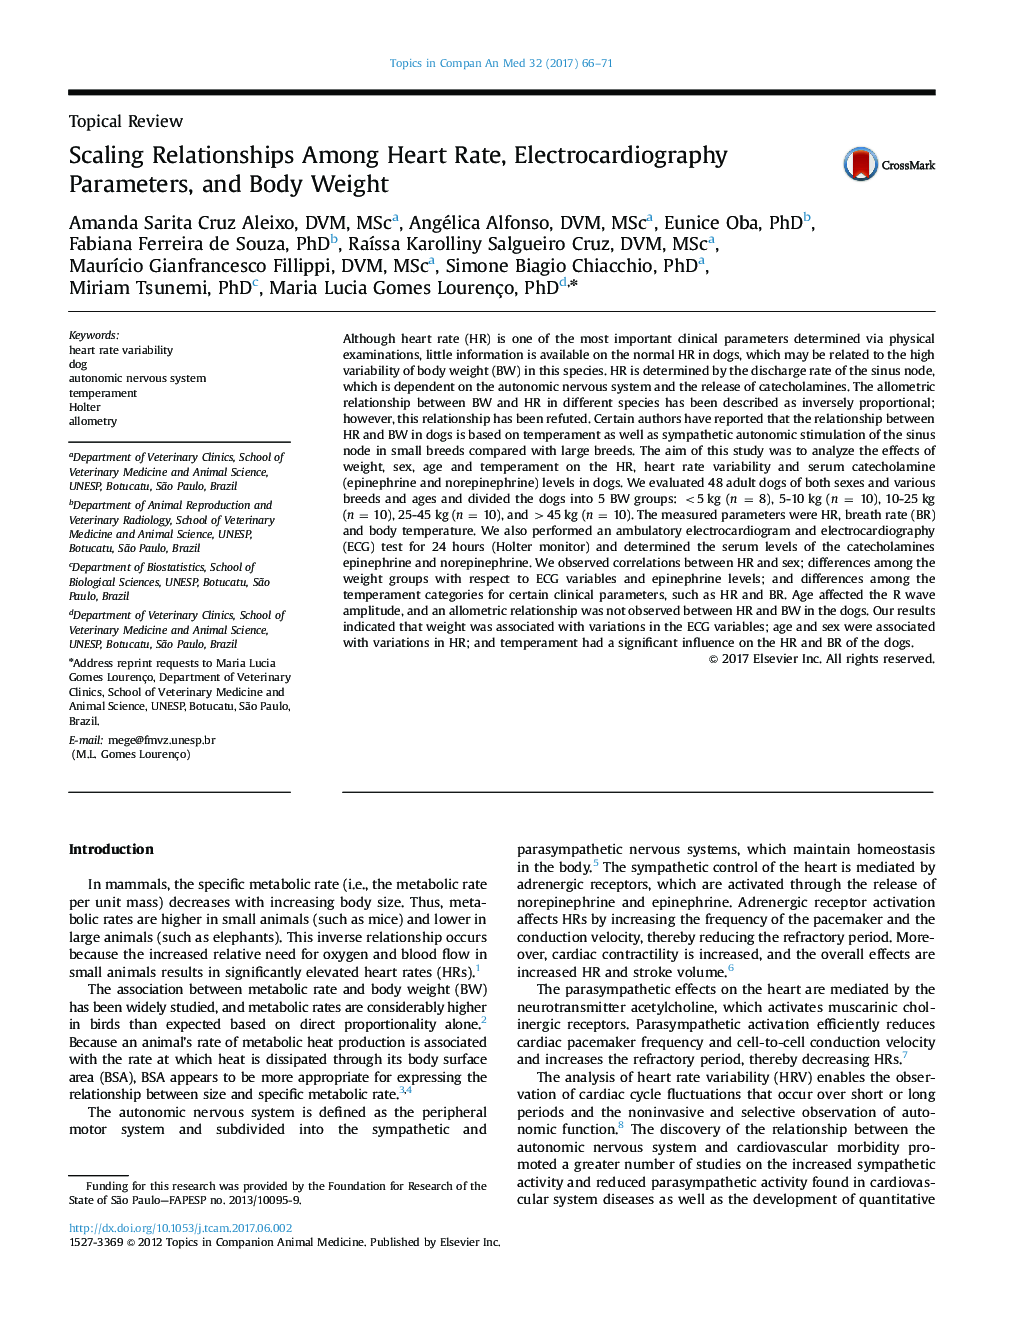 Scaling Relationships Among Heart Rate, Electrocardiography Parameters, and Body Weight